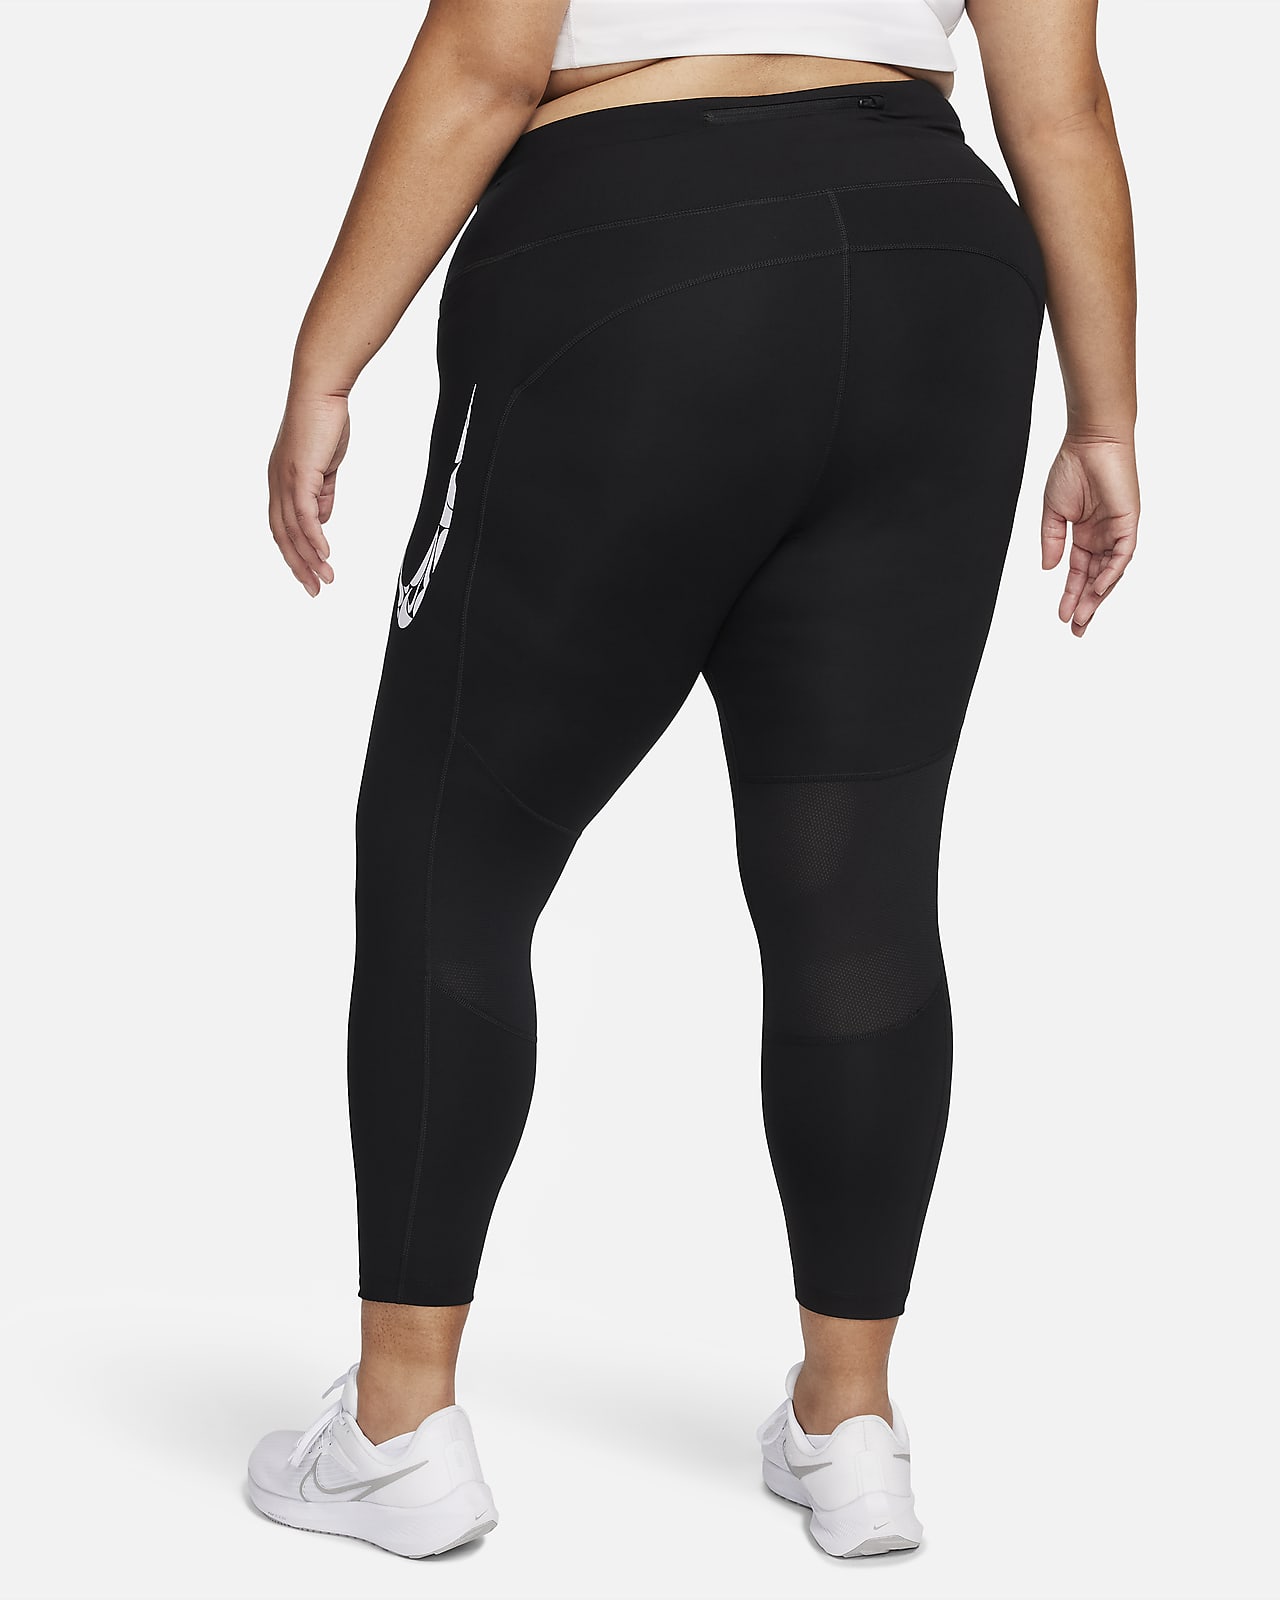 Nike Fast Women's Mid-Rise 7/8 Running Leggings with Pockets (Plus Size)